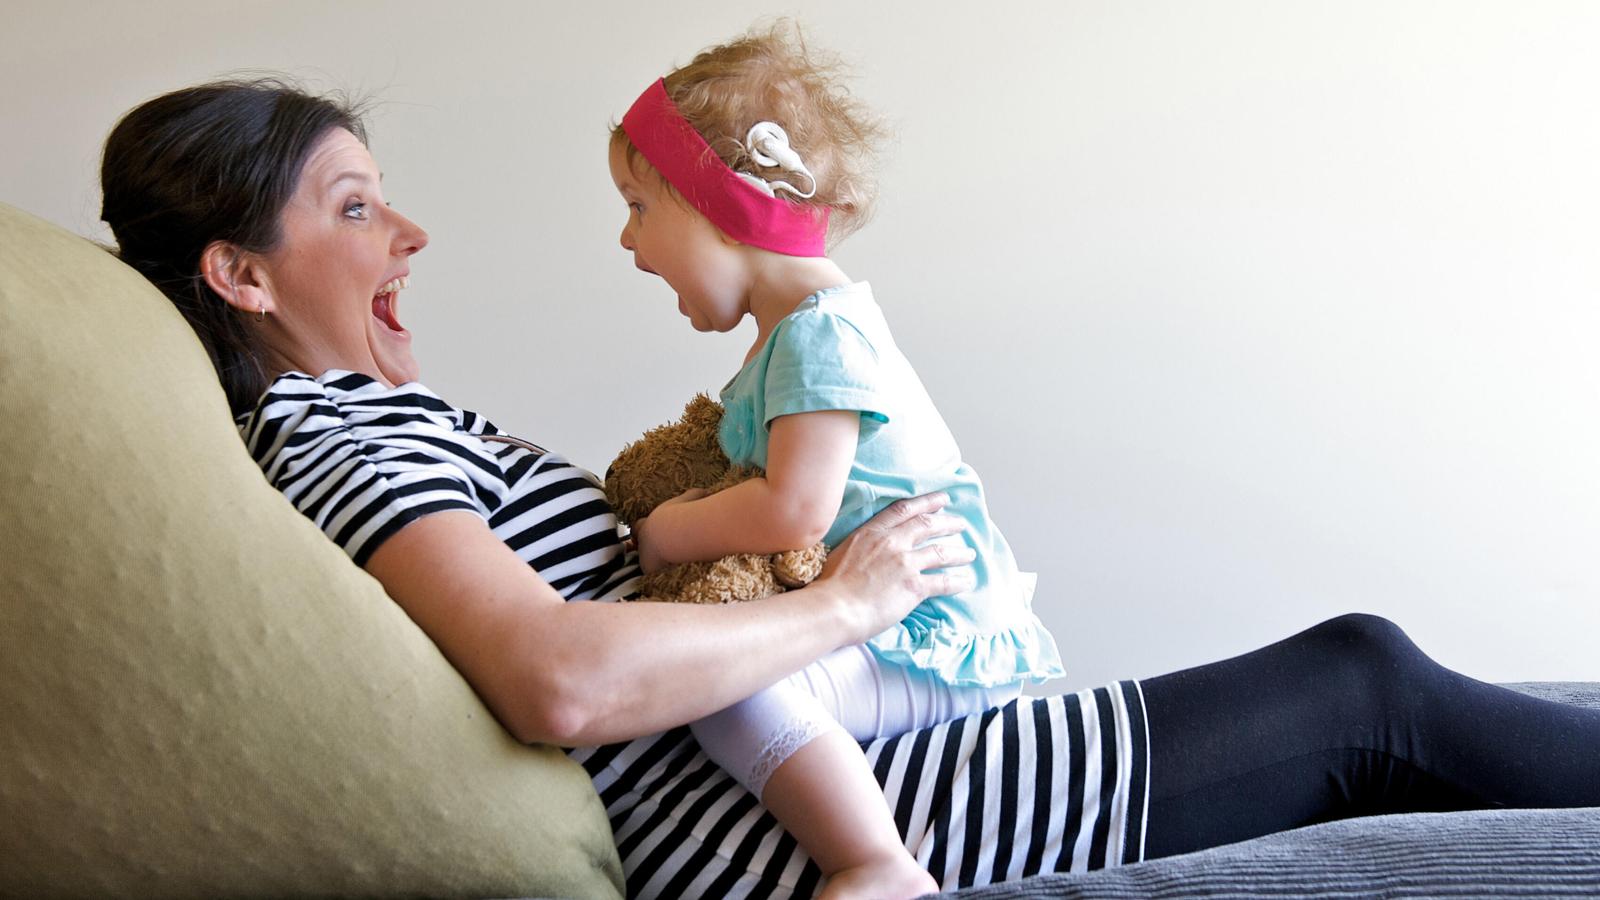 A toddler wearing an implant laughs as she sits on her mother's lap